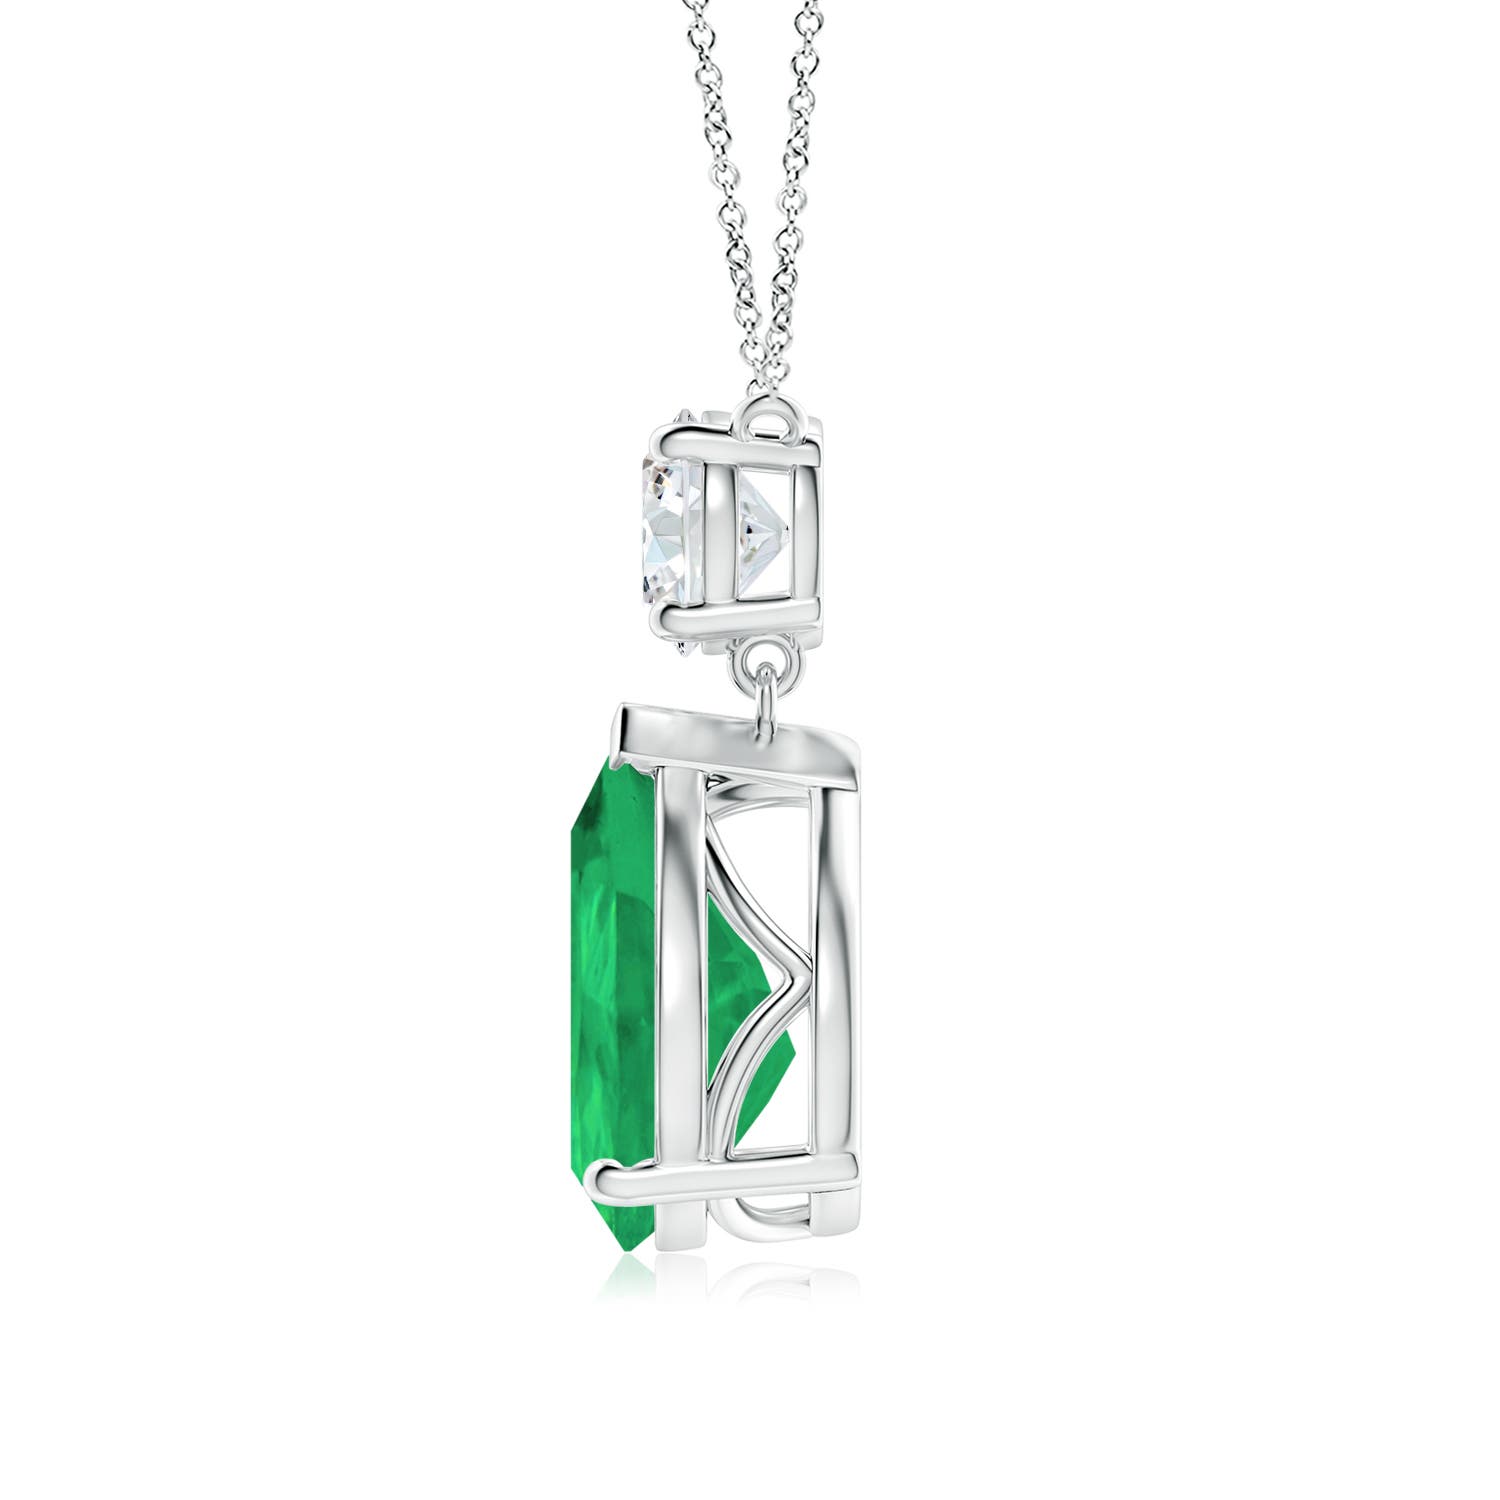 A - Emerald / 5.21 CT / 18 KT White Gold